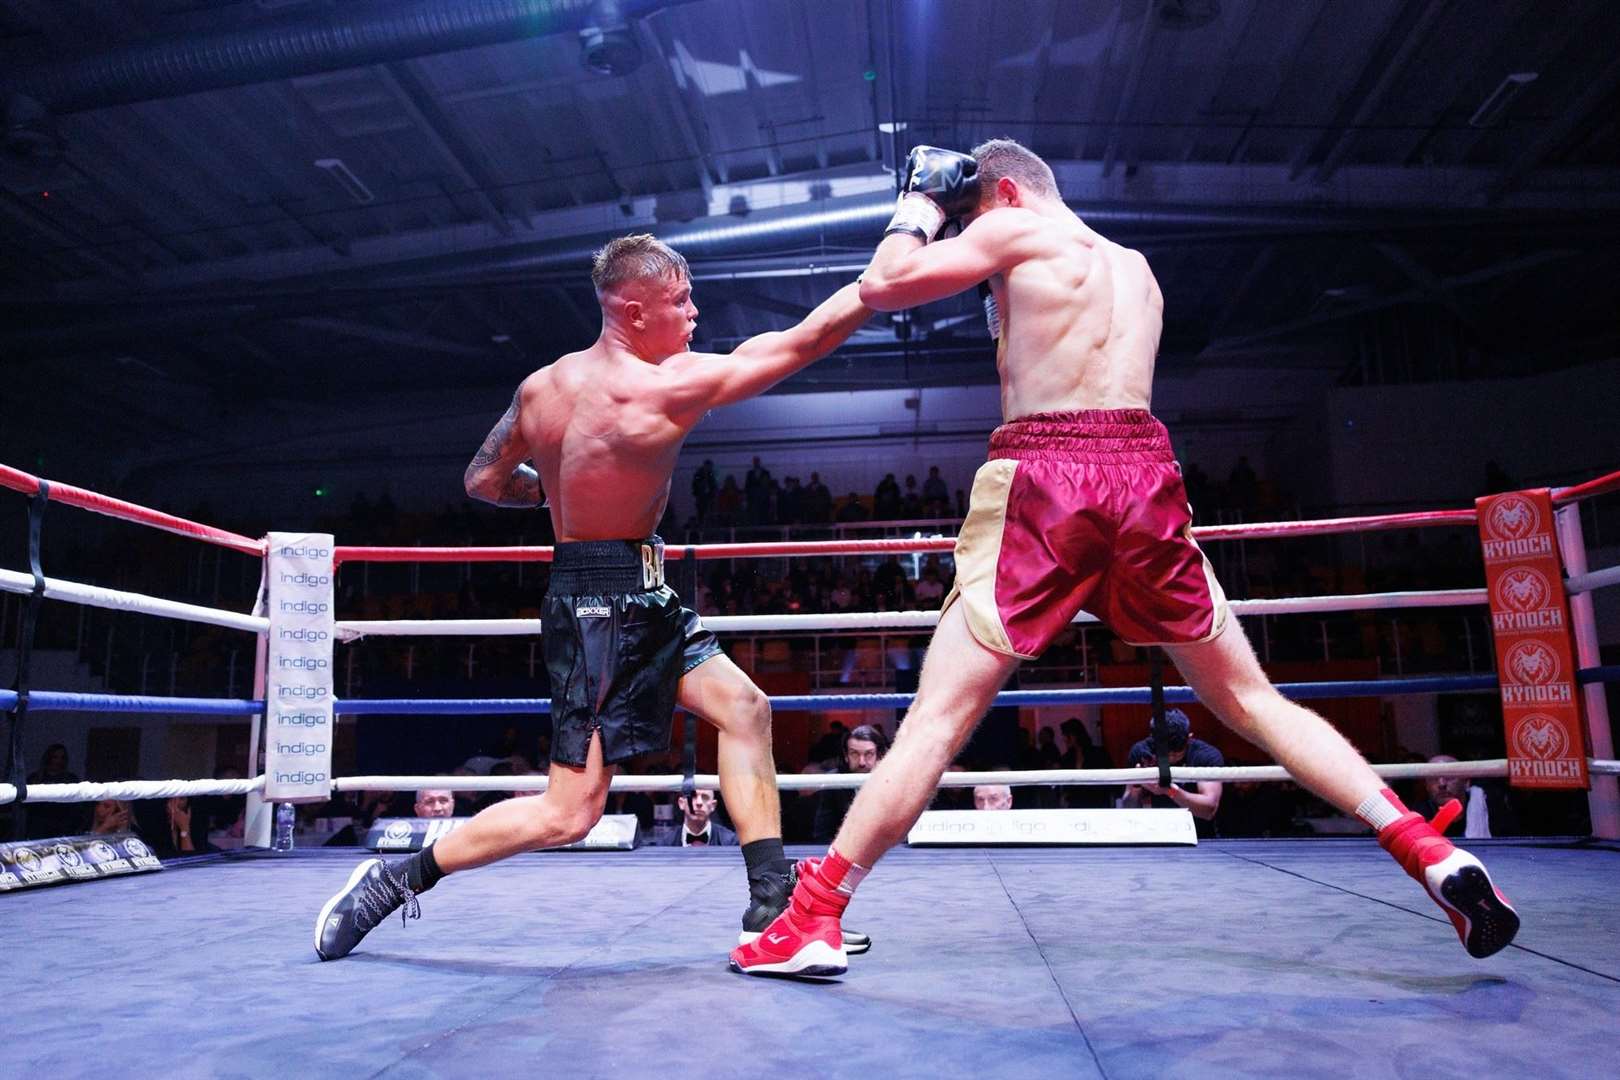 Highland Boxing Academy professional Ben Bartlett, from Dingwall, defeated Alfie Poole 97-93 to win the Scottish Welterweight Championship. Picture: Kynoch Boxing